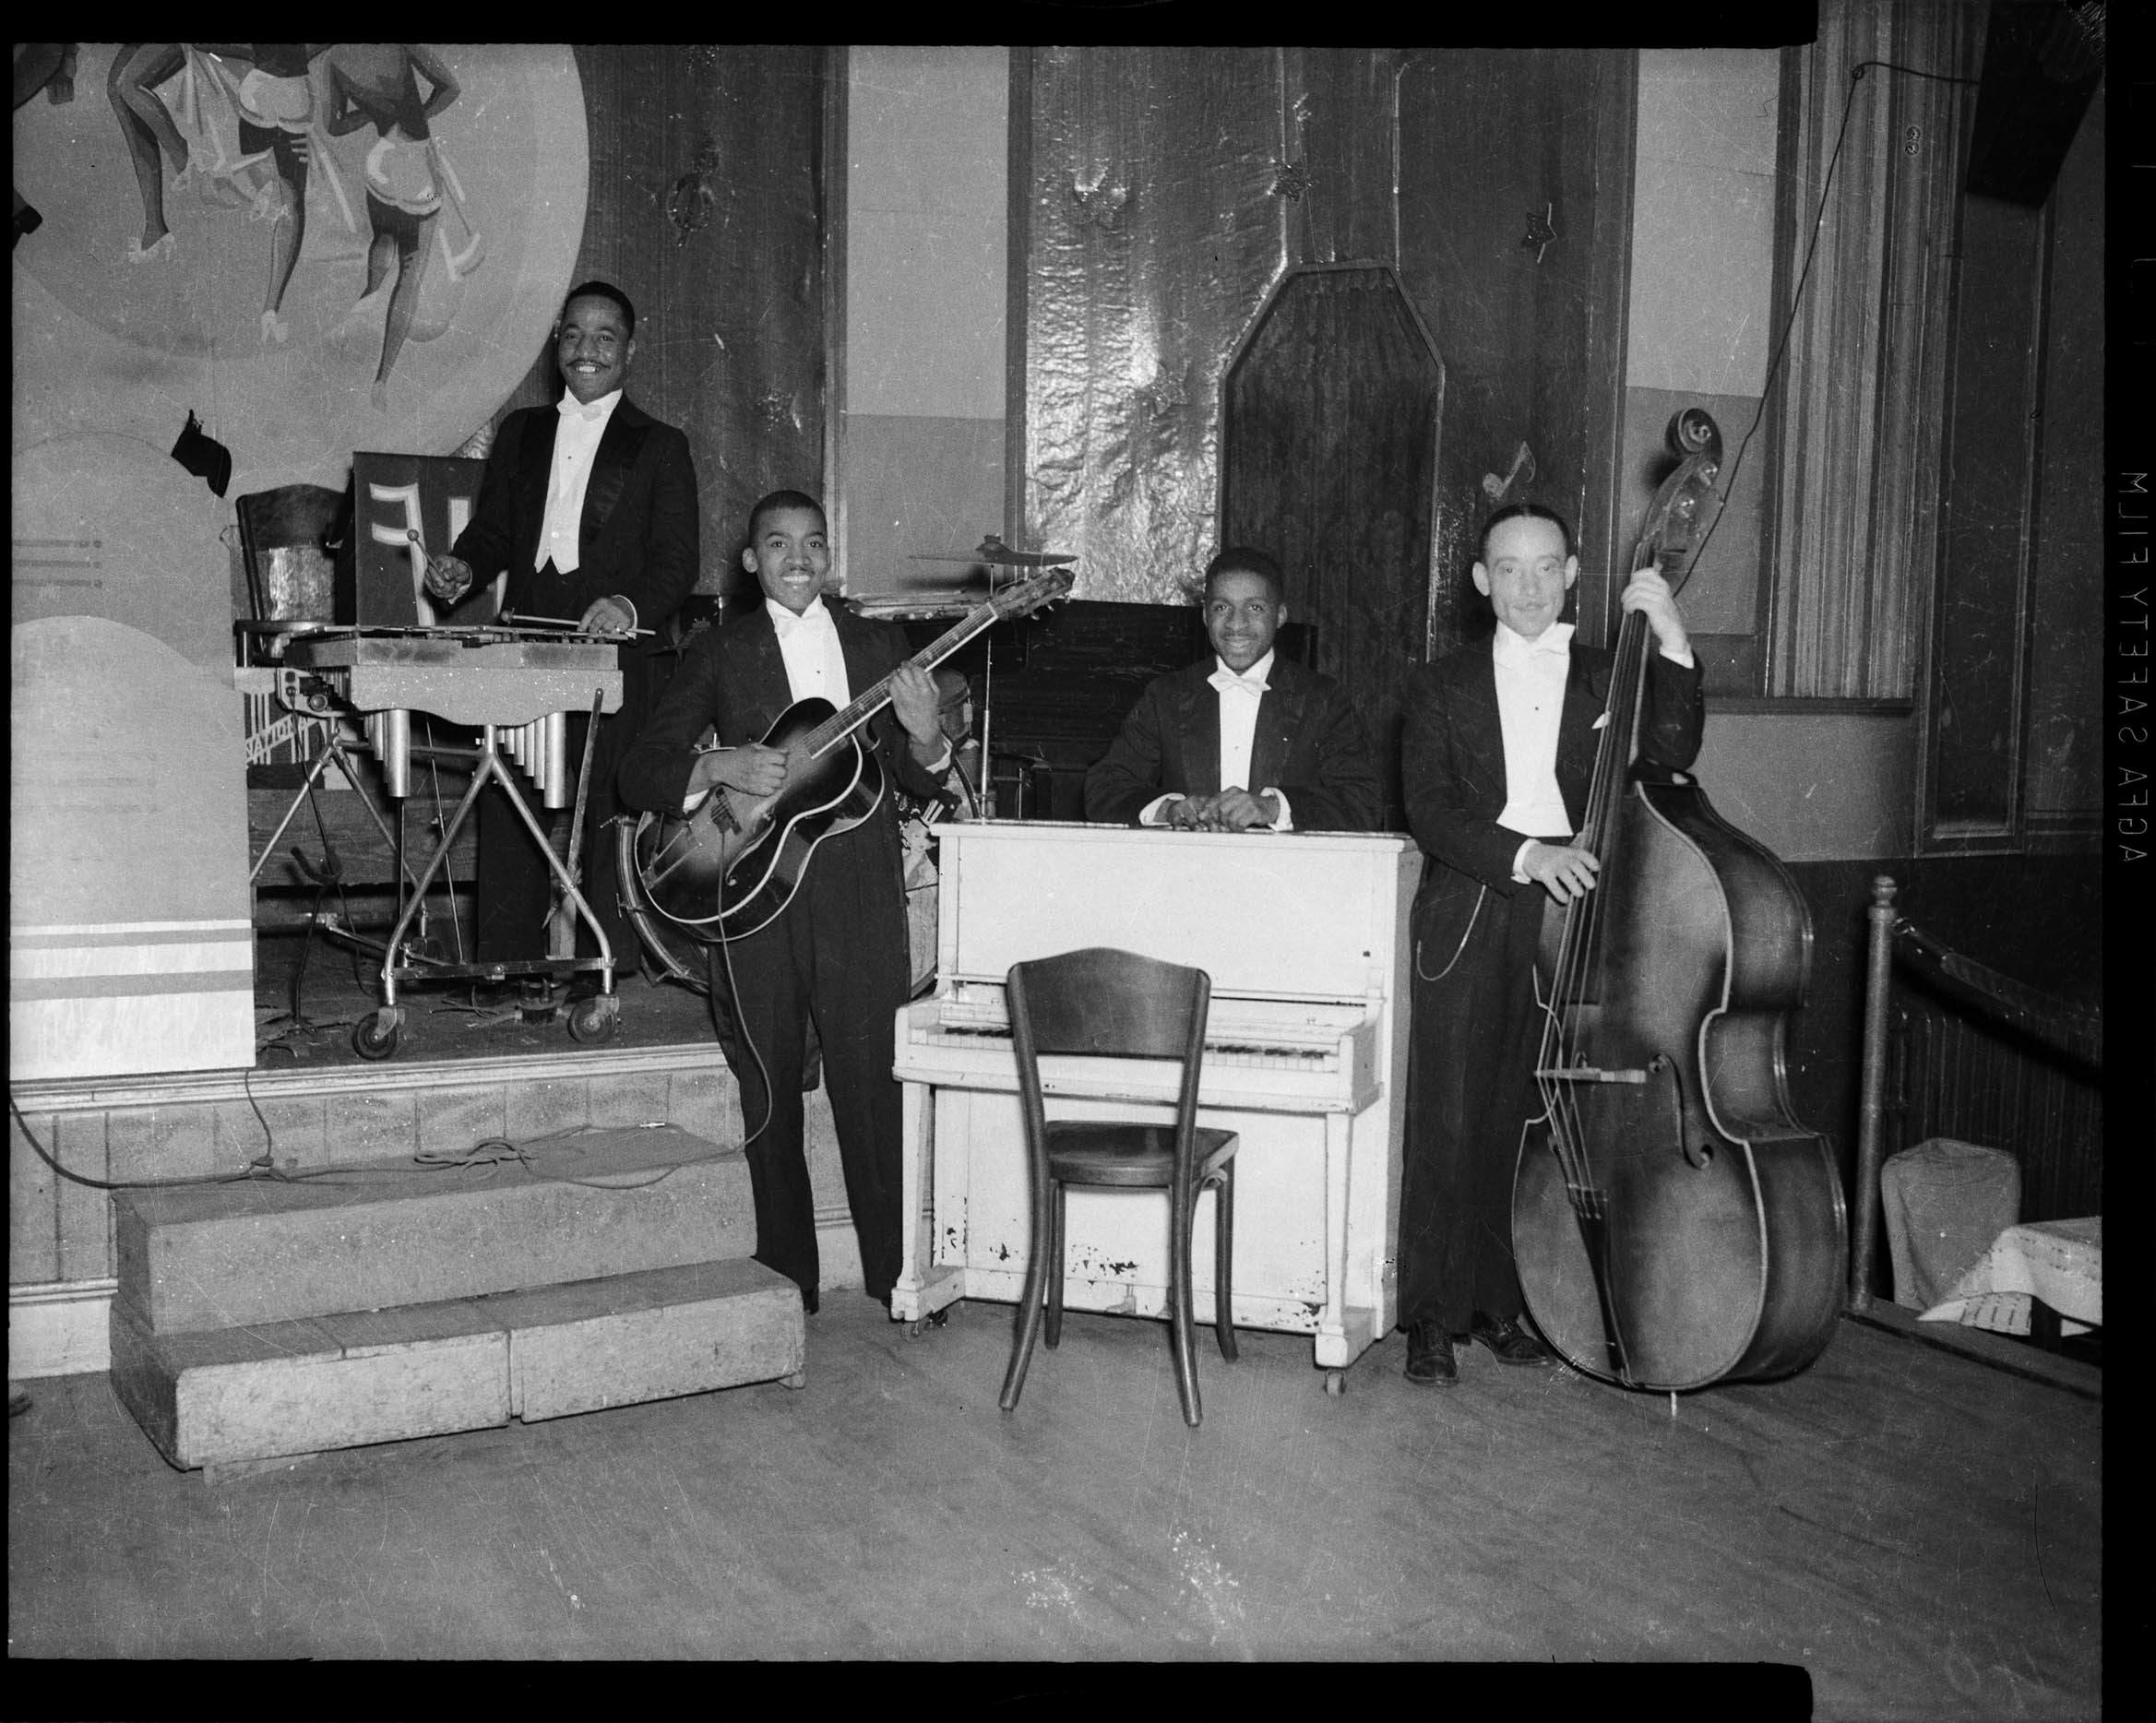 Charles Teenie Harris, James Honey Boy Minor on percussion, Joe Westray on electric guitar, Erroll Garner behind piano, and George Ghost Howell on bass, on stage of Harlem Casino, ca. 1939-1940, black and white: Agfa Safety Film, Carnegie Museum of Art, Heinz Family Fund